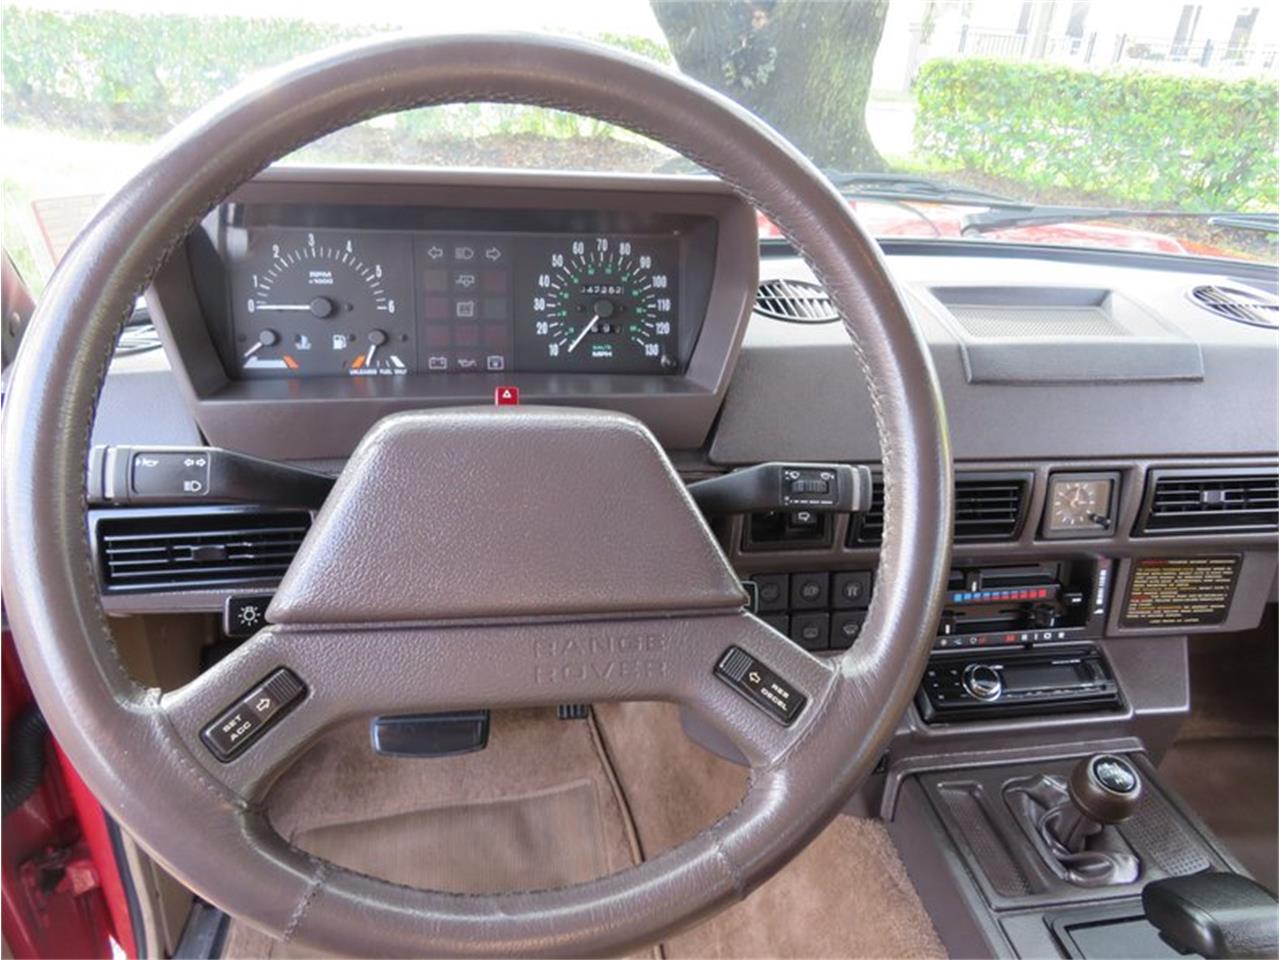 1990 Land Rover Range Rover for sale in Lakeland, FL – photo 64